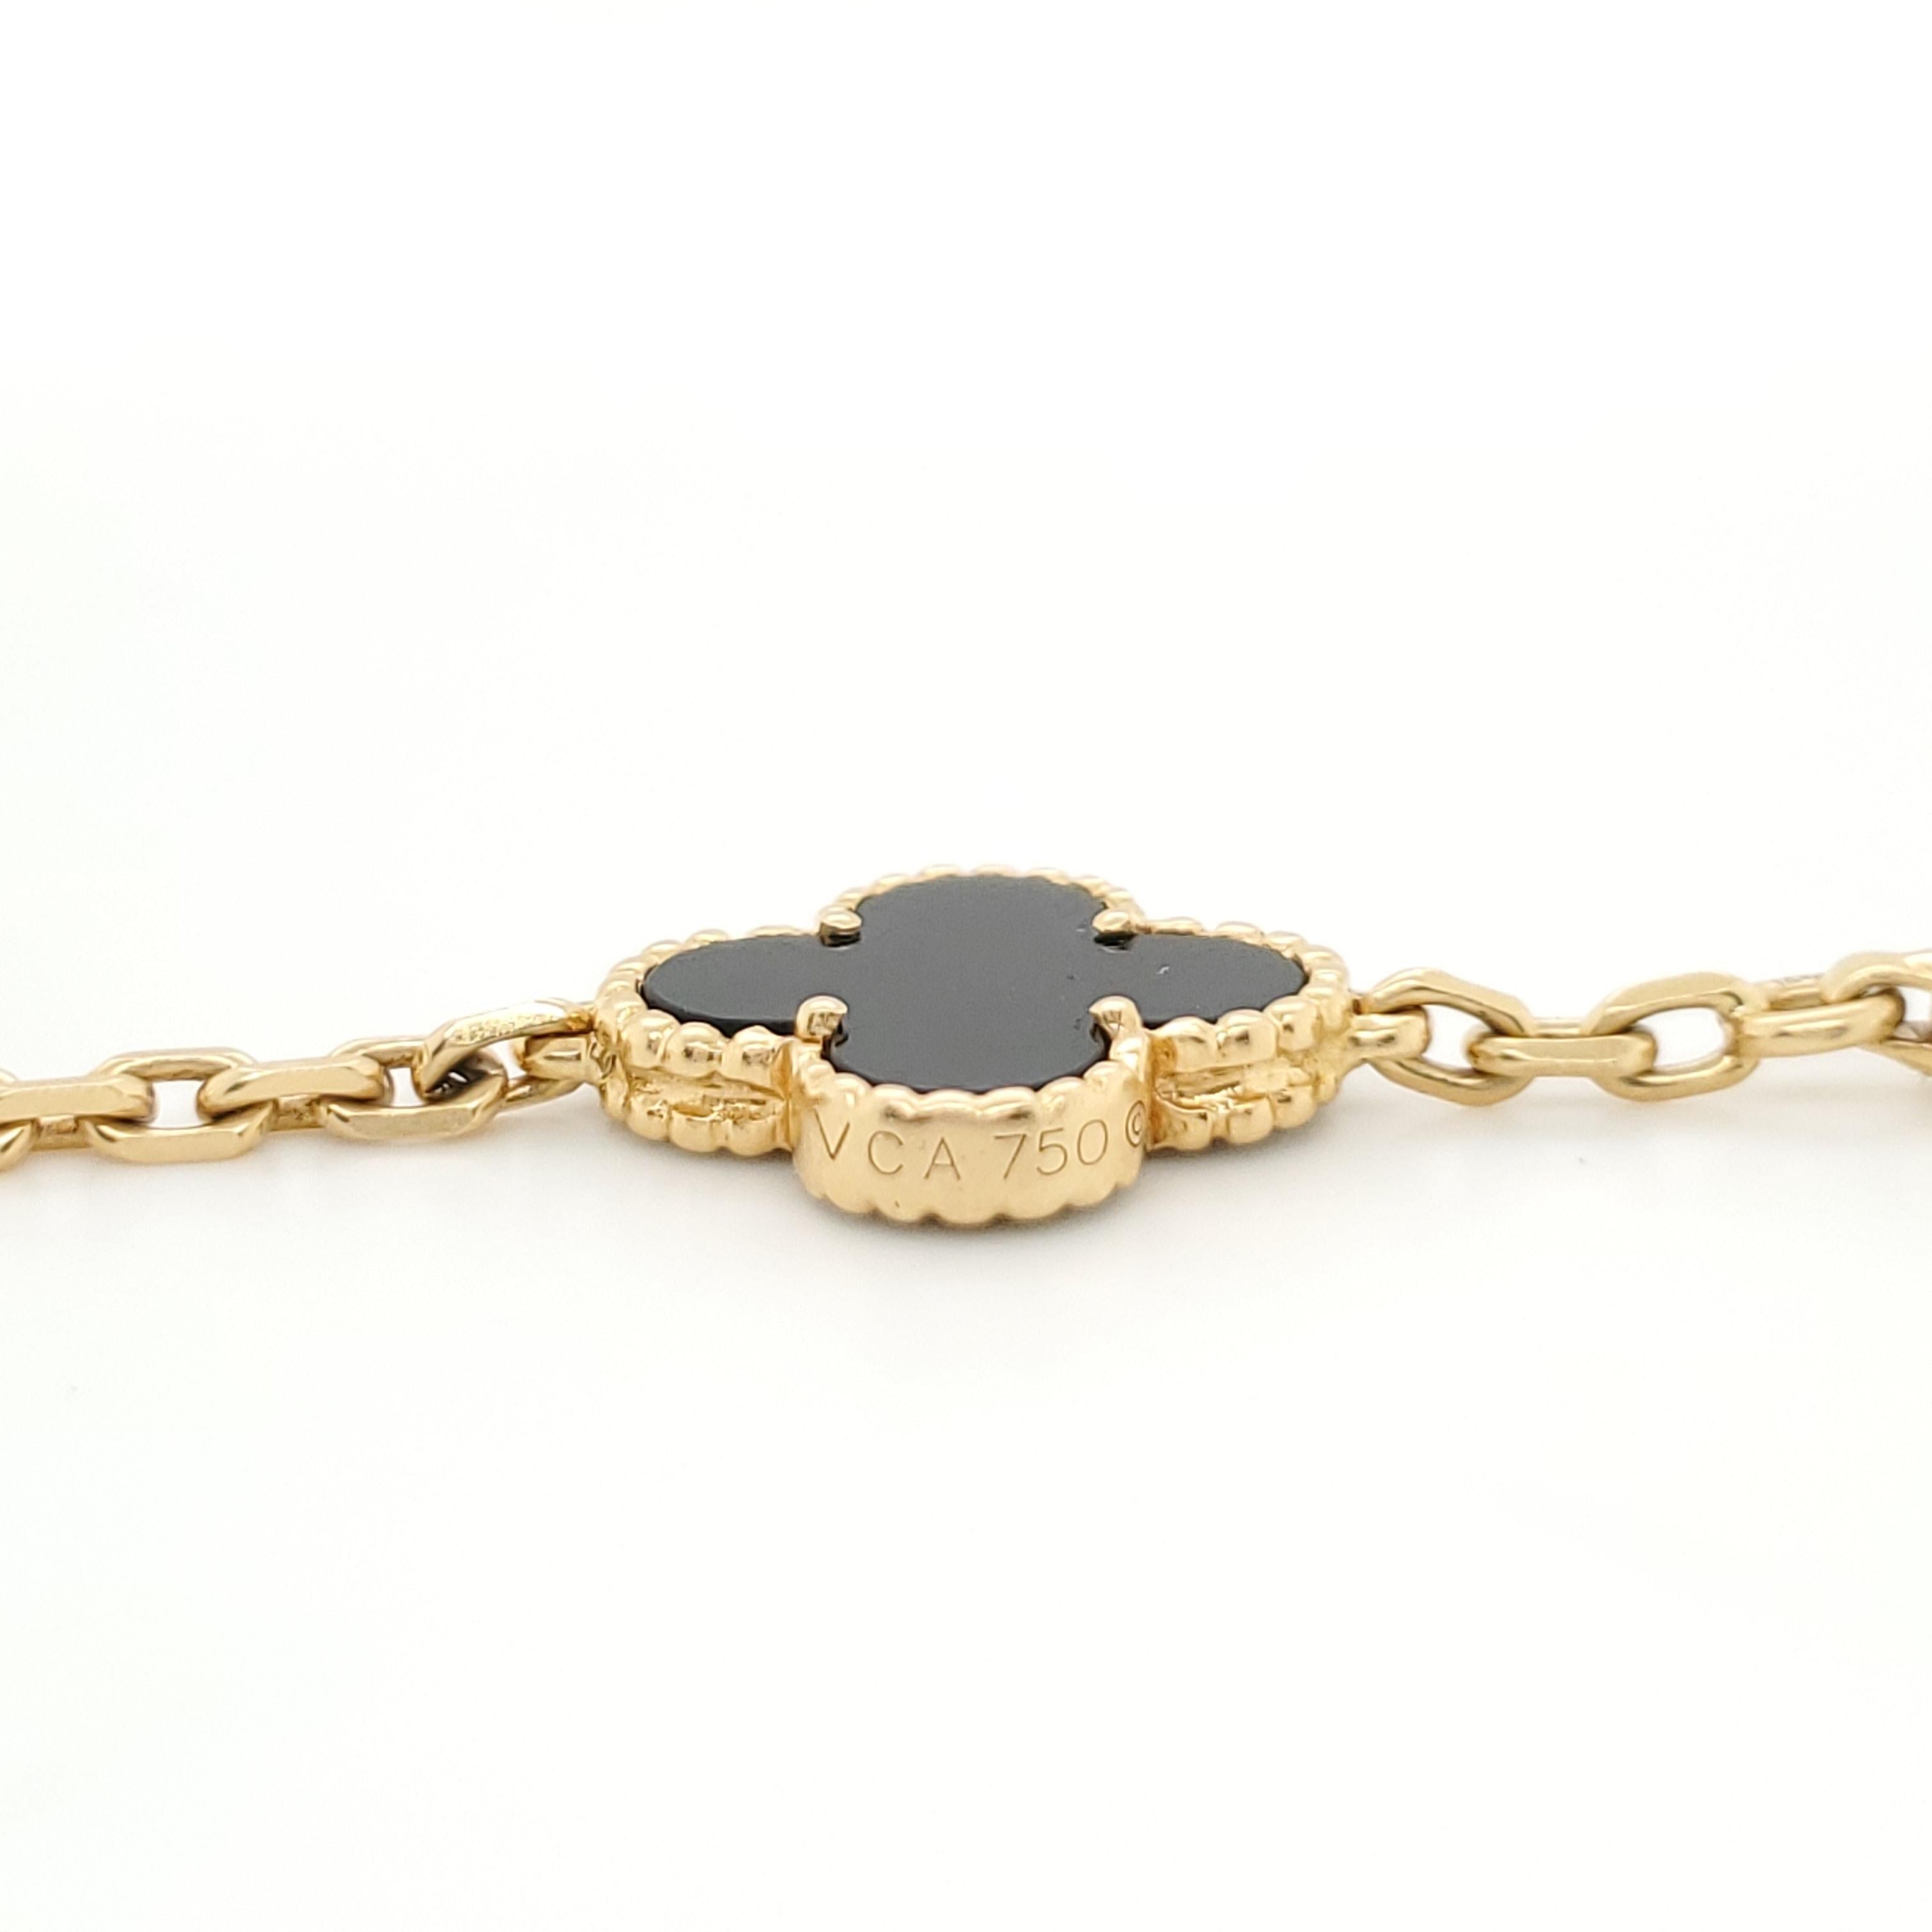 Authentic Van Cleef & Arpels 18 karat yellow gold five motif onyx Alhambra bracelet. Bracelet is marked VCA 750, CL 37987. The bracelet is 7 inches in length. Bracelet does not come with original box or papers. 